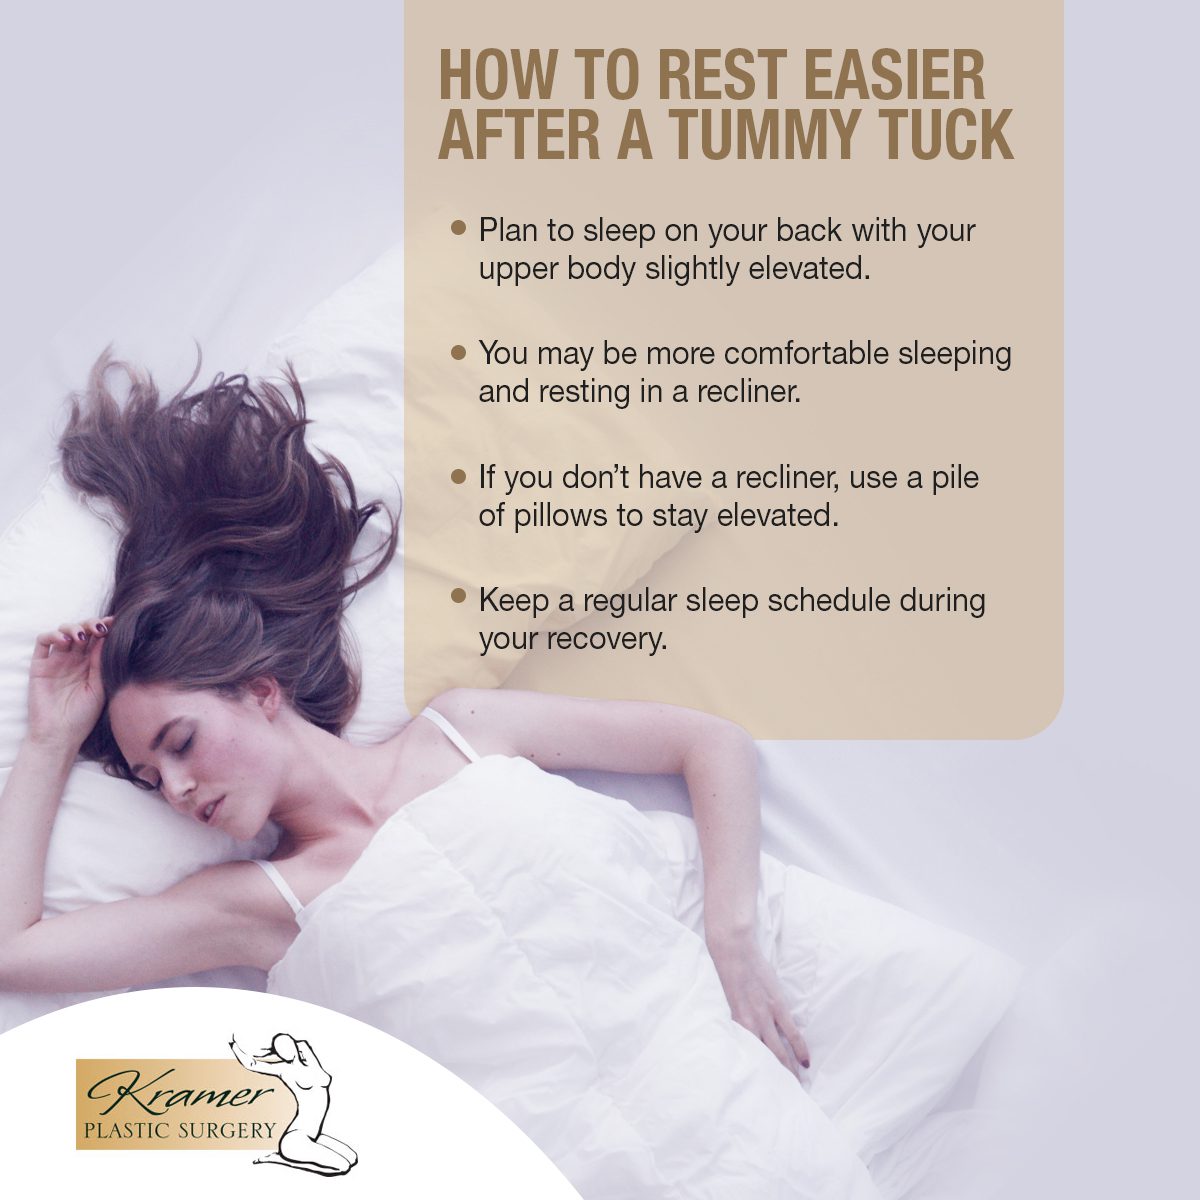 How to Rest Easier after a Tummy Tuck